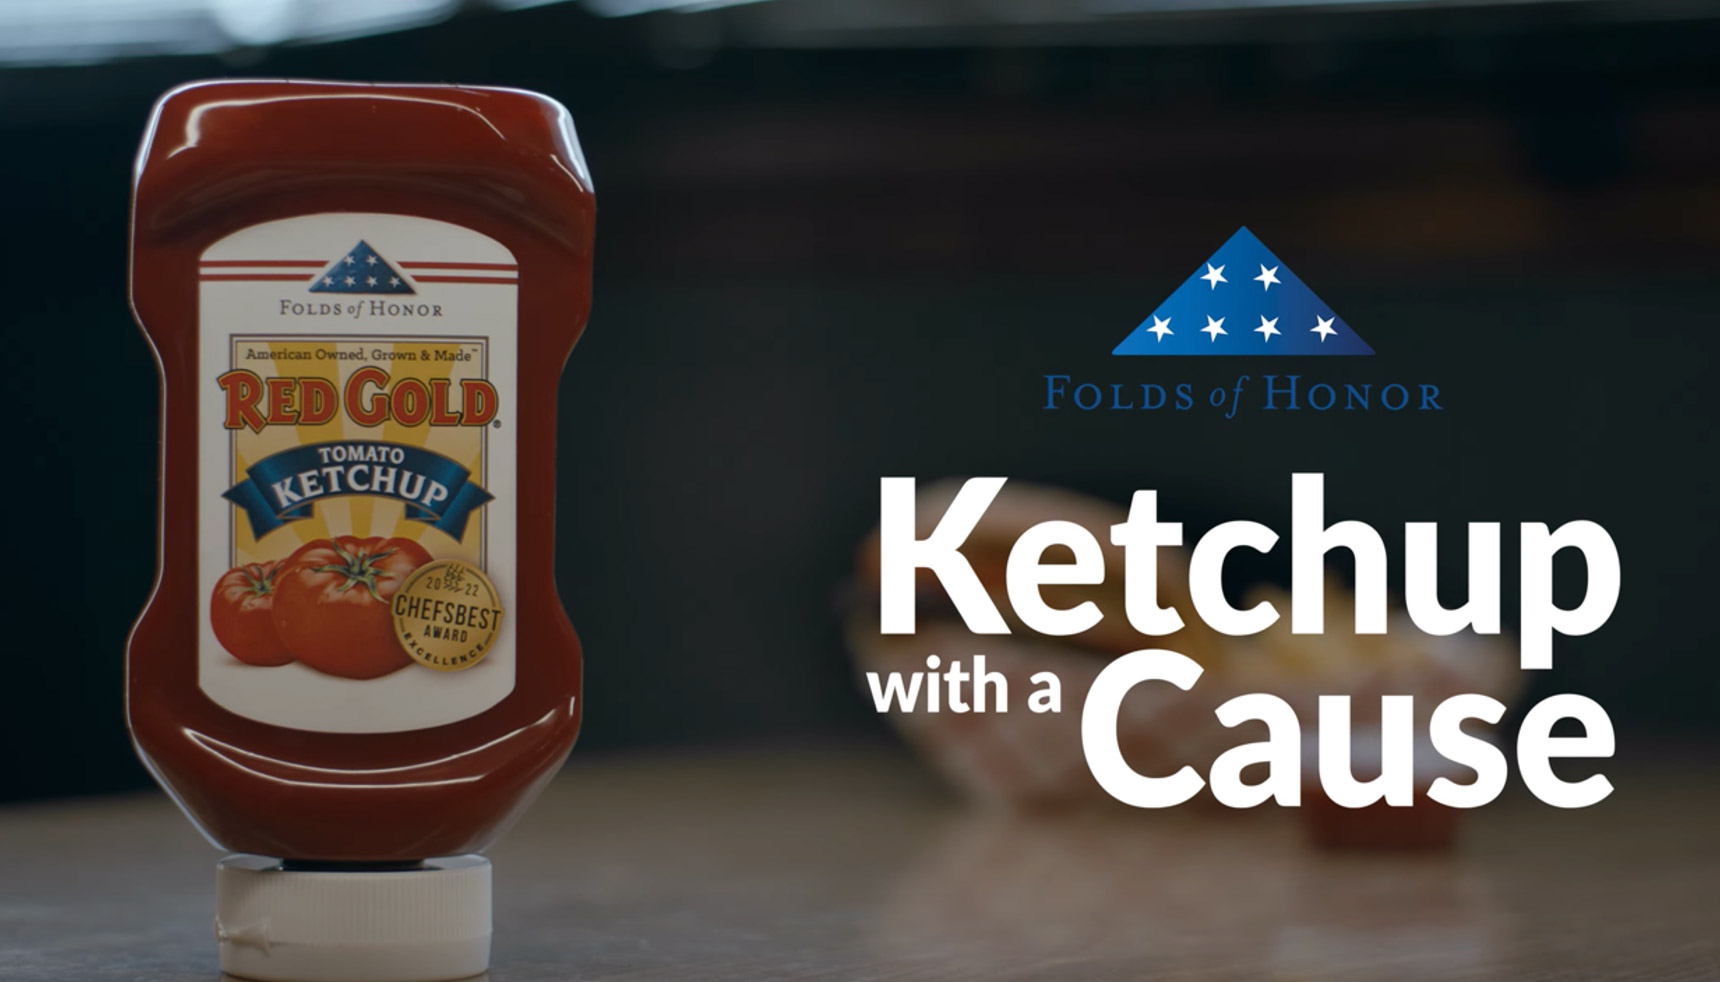 Red Gold's Folds of Honor Ketchup associates your brand with a worthy cause.